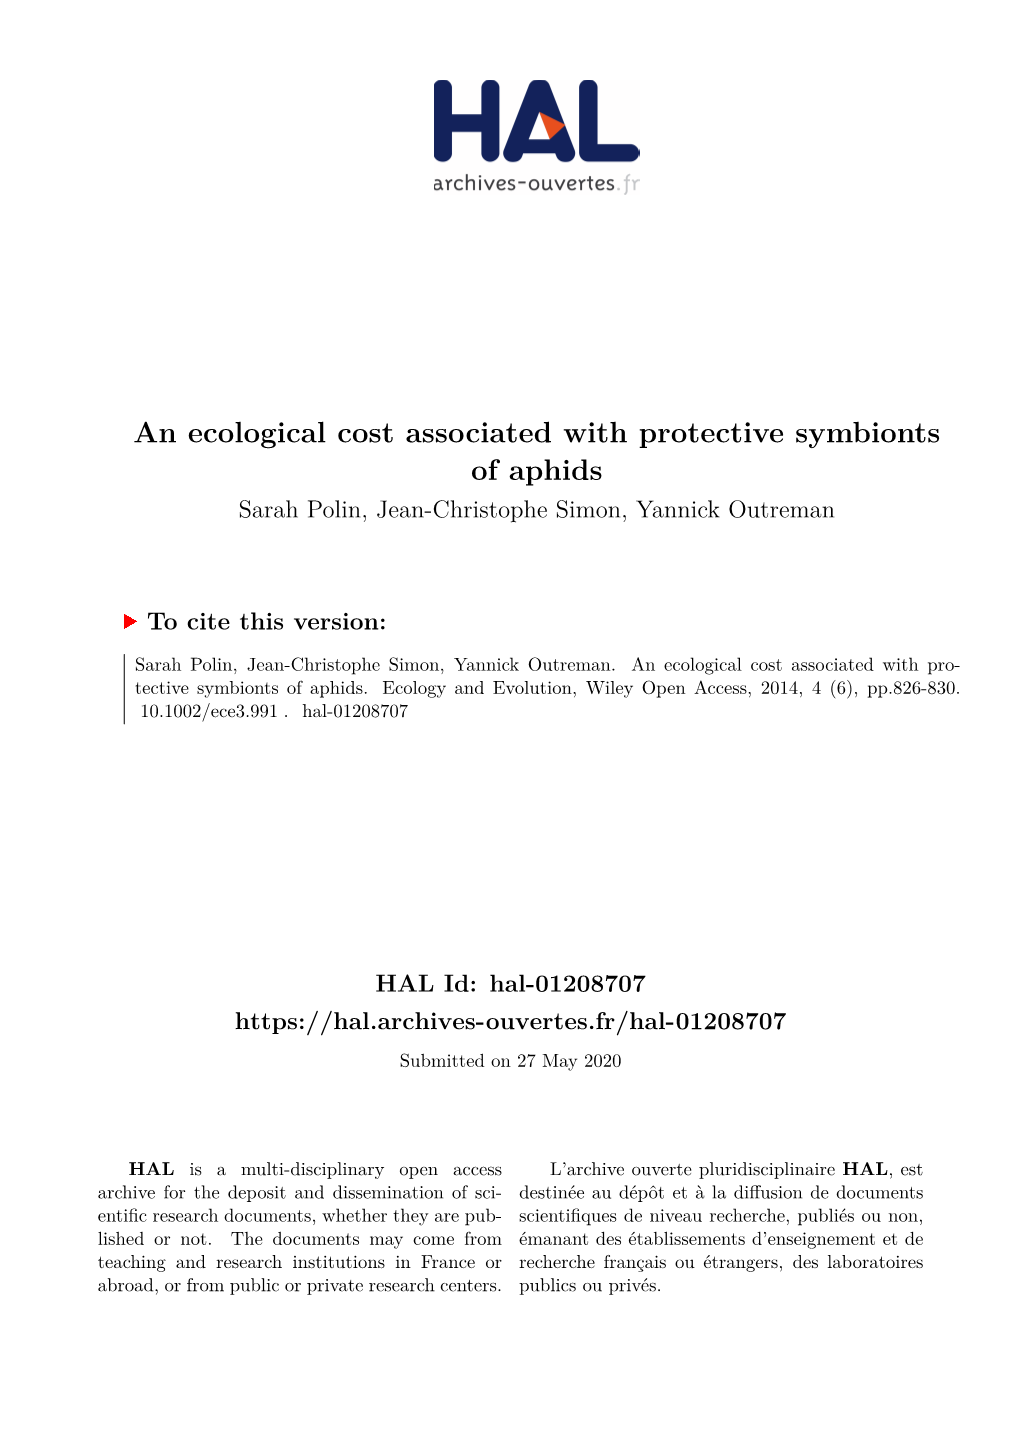 An Ecological Cost Associated with Protective Symbionts of Aphids Sarah Polin, Jean-Christophe Simon, Yannick Outreman